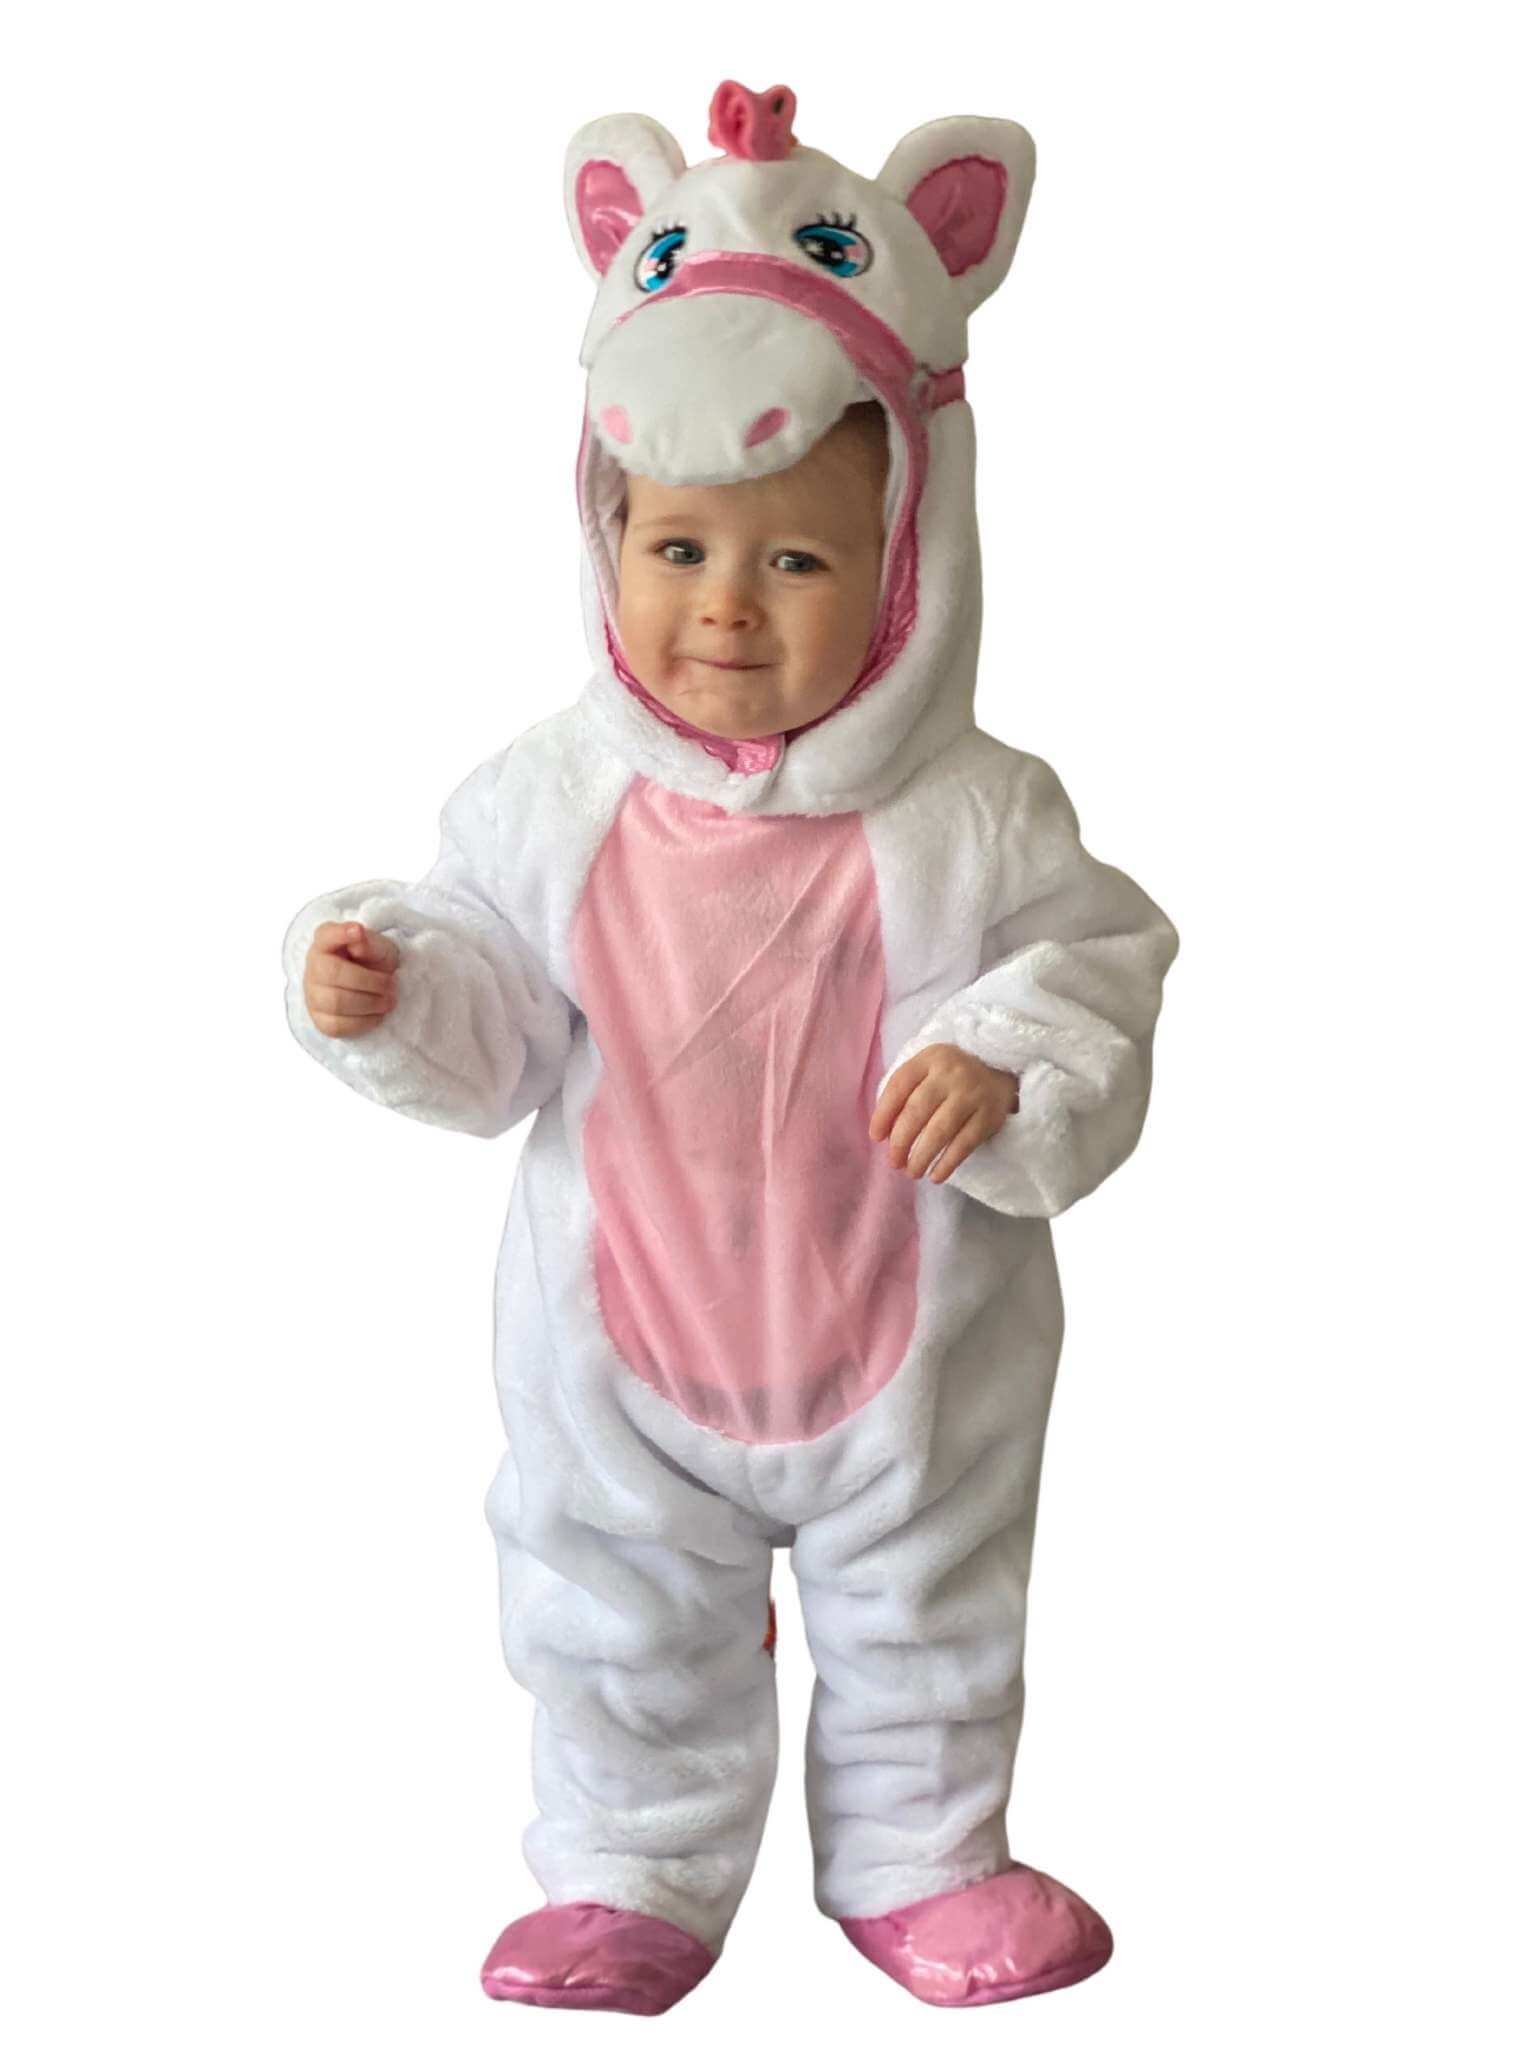 Toddler wearing a plush white unicorn onesie with pink tummy and white unicorn head with embroidered face.